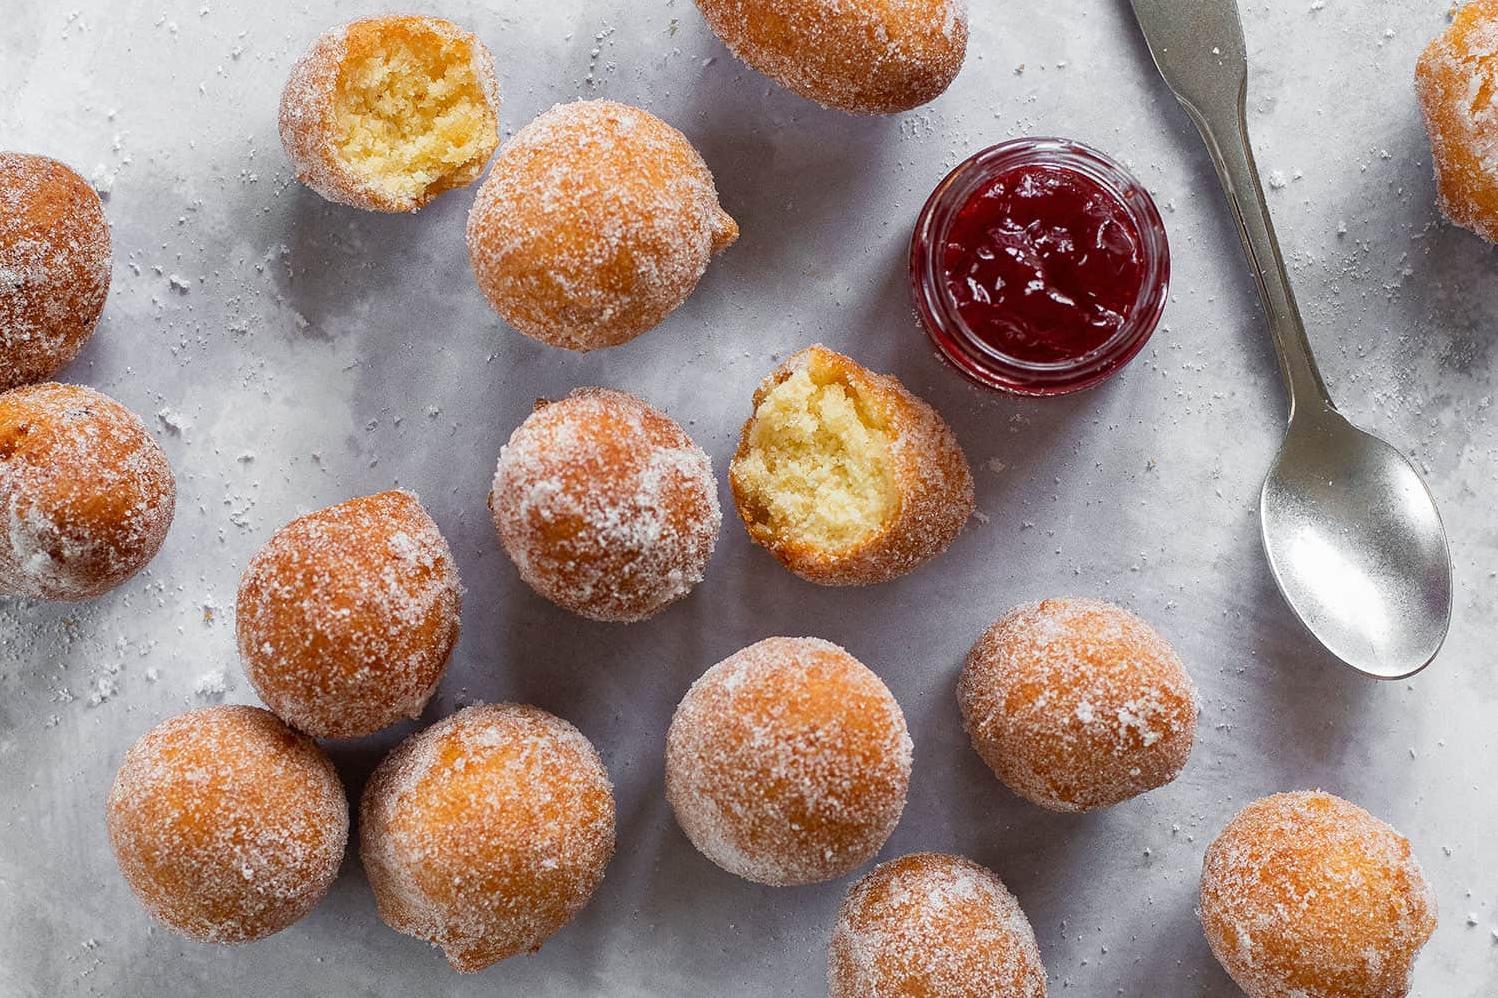  Satisfy your sweet tooth cravings with these gluten-free donut drops.